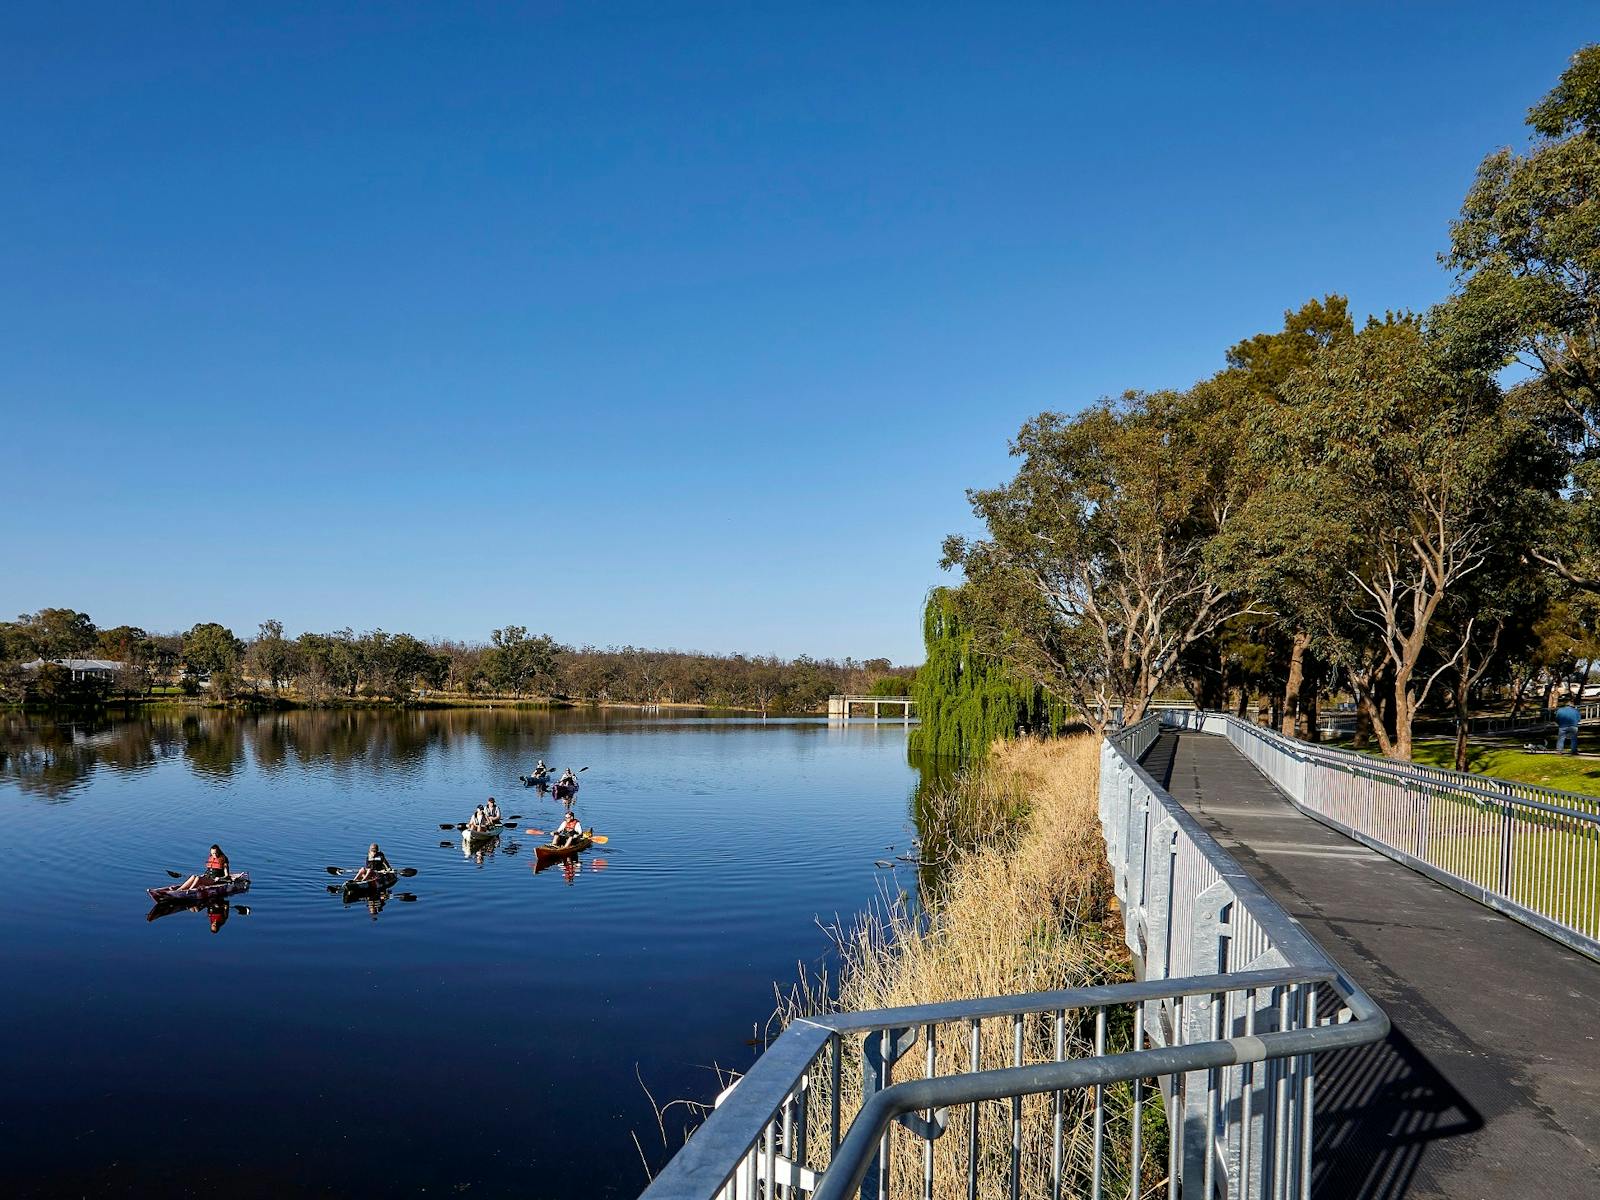 Boardwalk on right with six kayaks on Lake Inverell on left